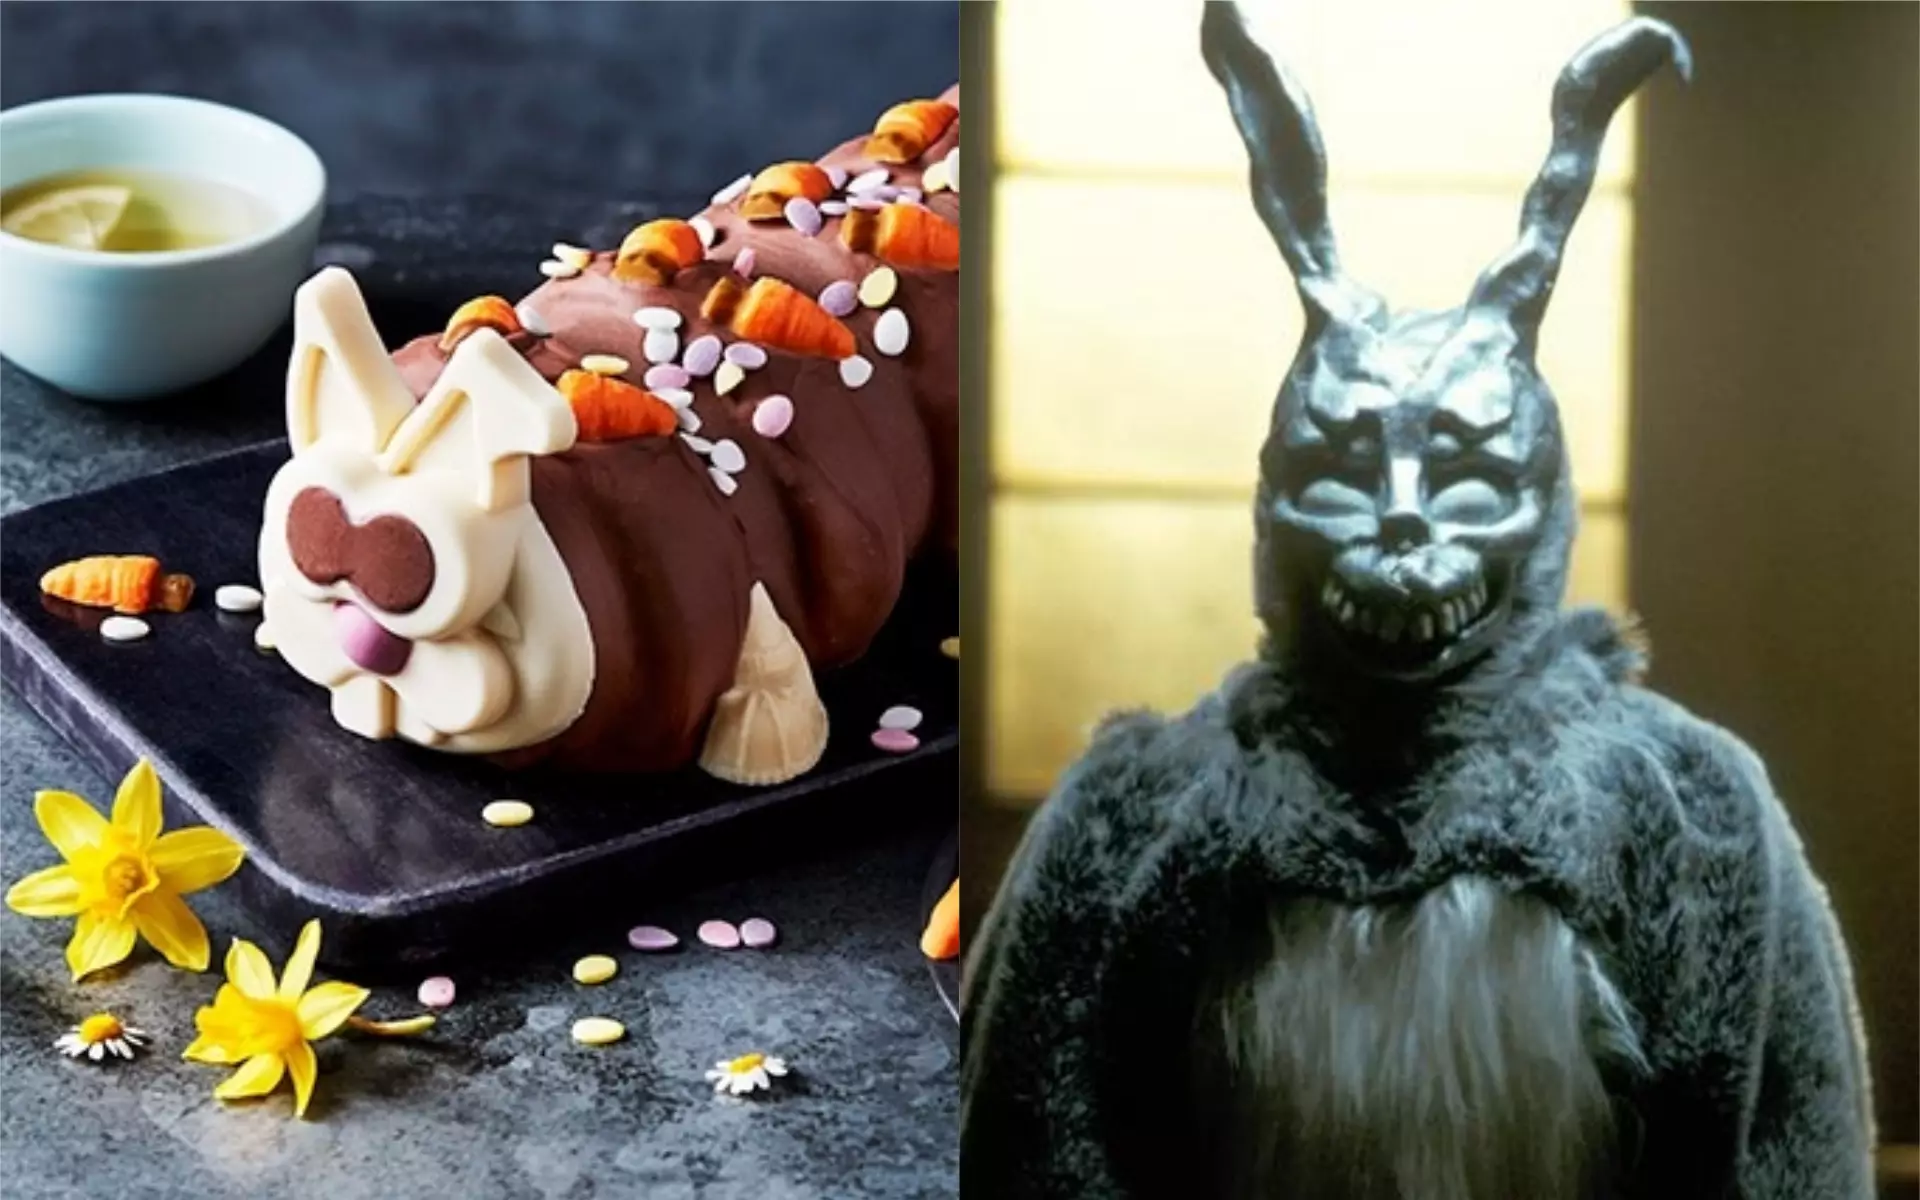 People think the M&S cake looks like the demonic Frank from Donnie Darko.